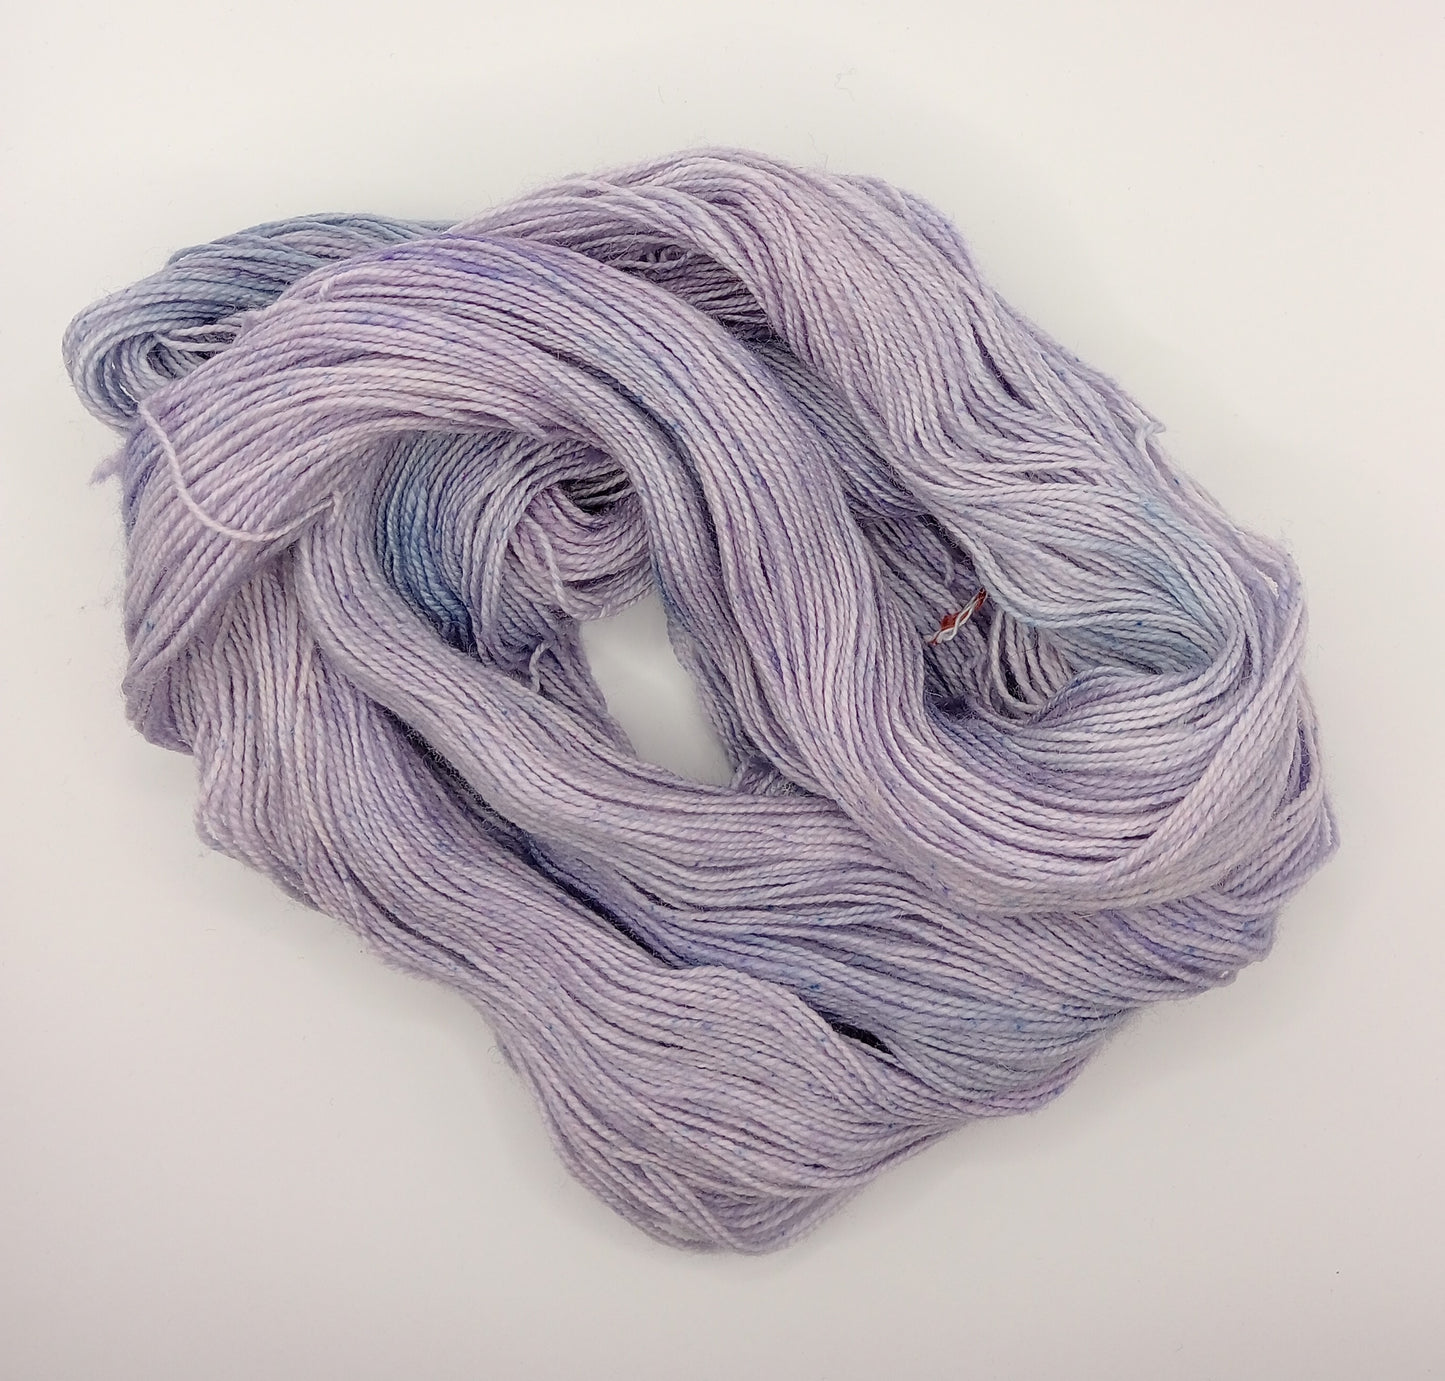 100G hand dyed Bluefaced Leicester/Nylon High Twist sock yarn - "Lilac"